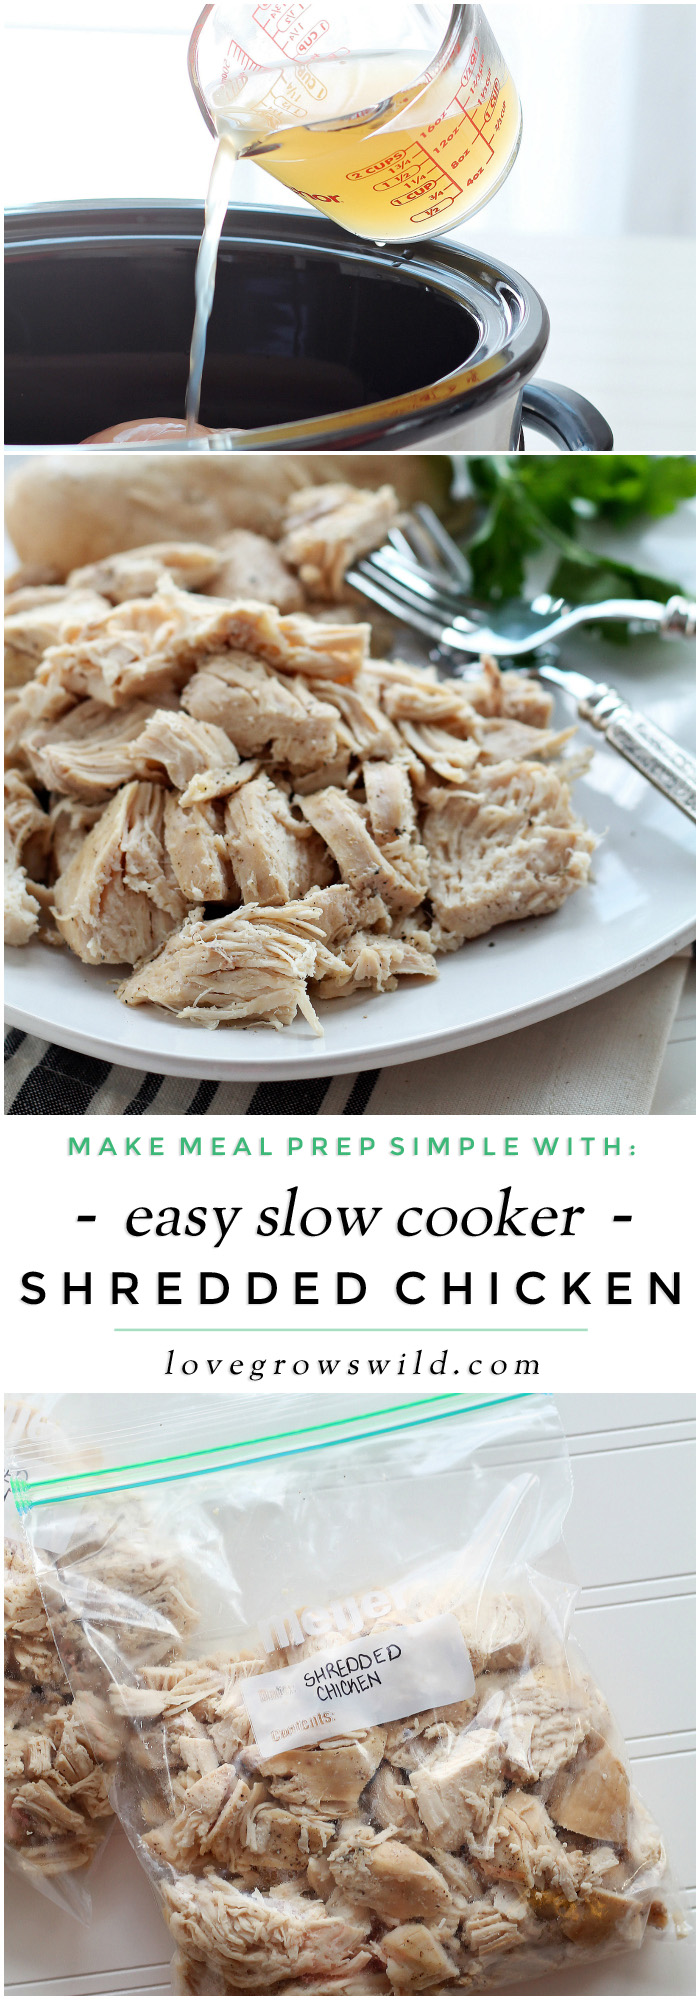 Make meal prep easier with this tender, juicy Slow Cooker Shredded Chicken! Cook the chicken ahead of time and freeze to make dinnertime a breeze on busy nights! Learn how at LoveGrowsWild.com